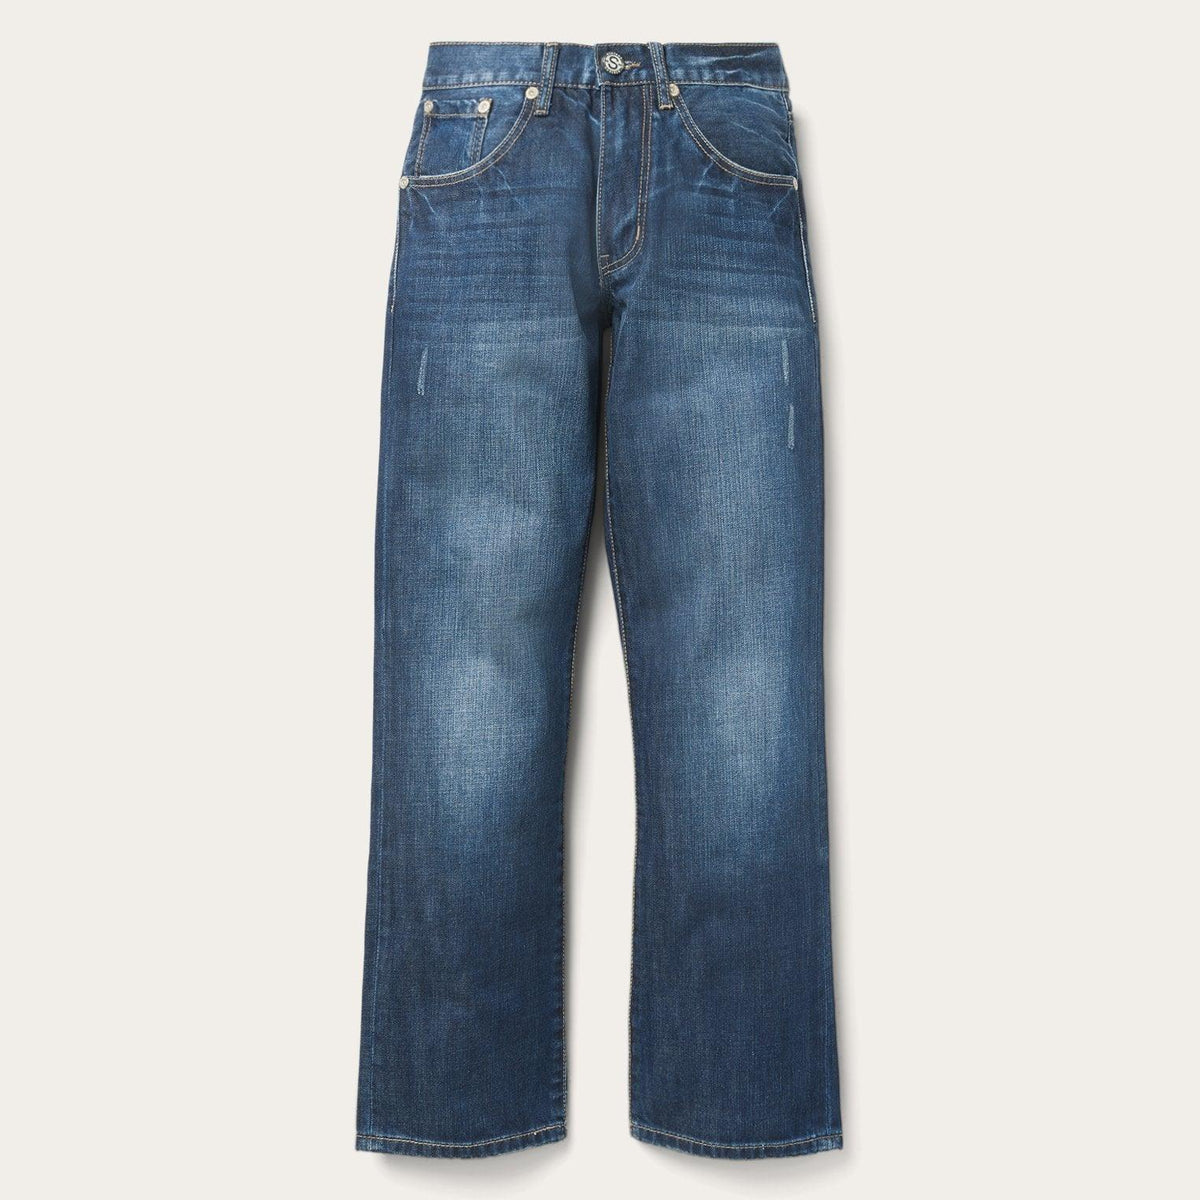 Stetson 1312 Fit Jeans With Back Pocket Stitching - Flyclothing LLC